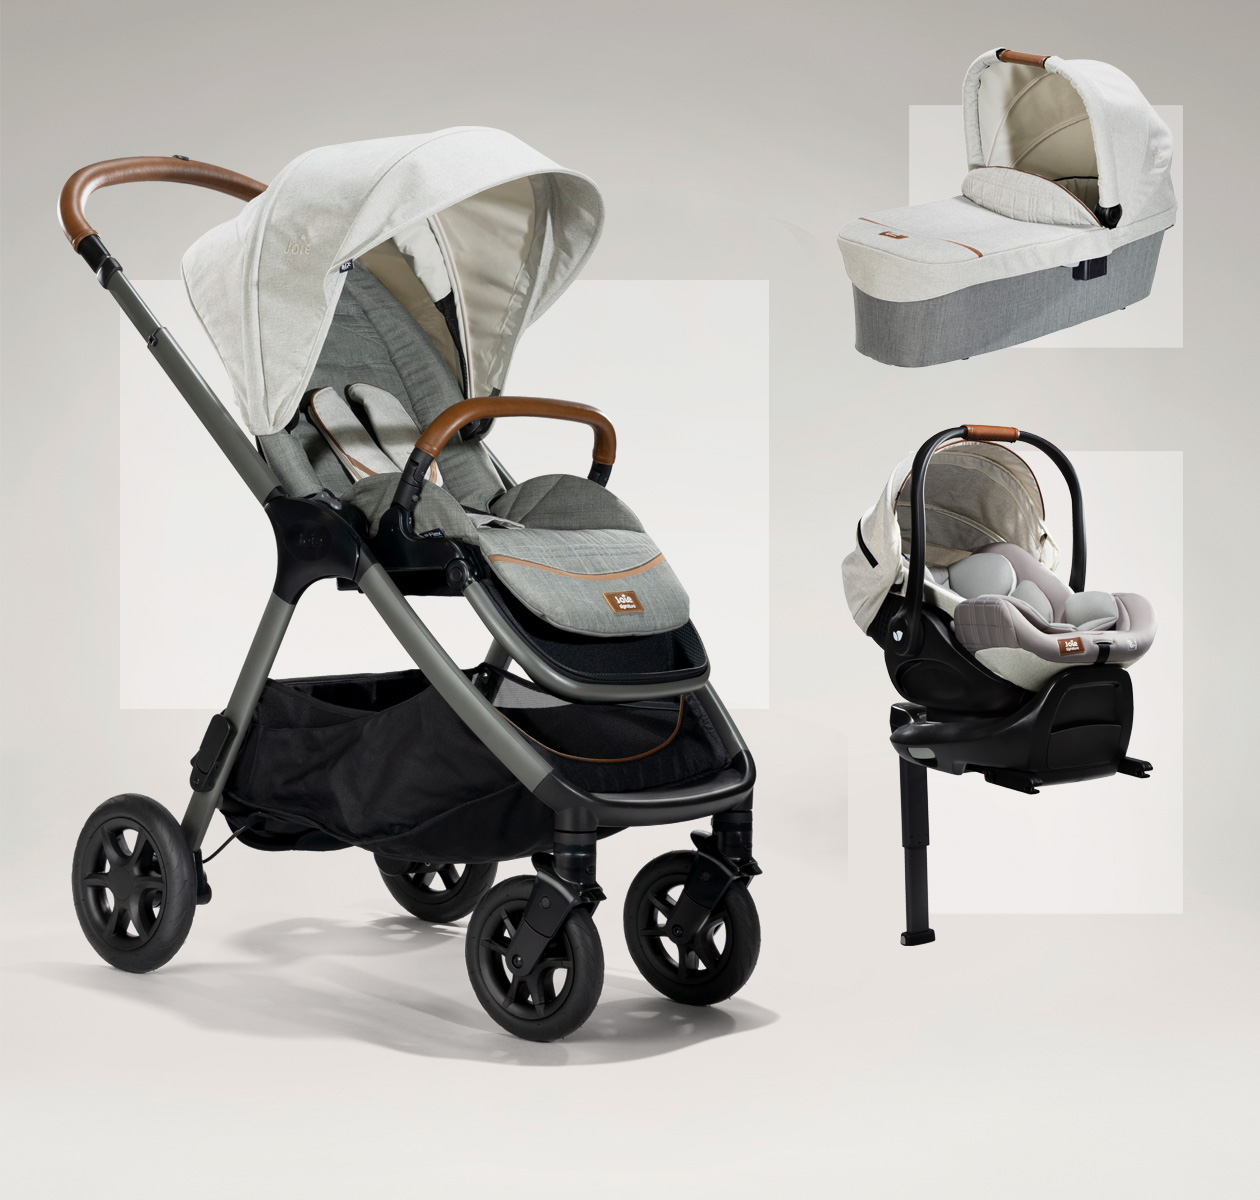 3 Joie Signature products in gray with brown leather accents: the Finiti pram, Ramble carry cot, and I-Level Recline infant car seat.